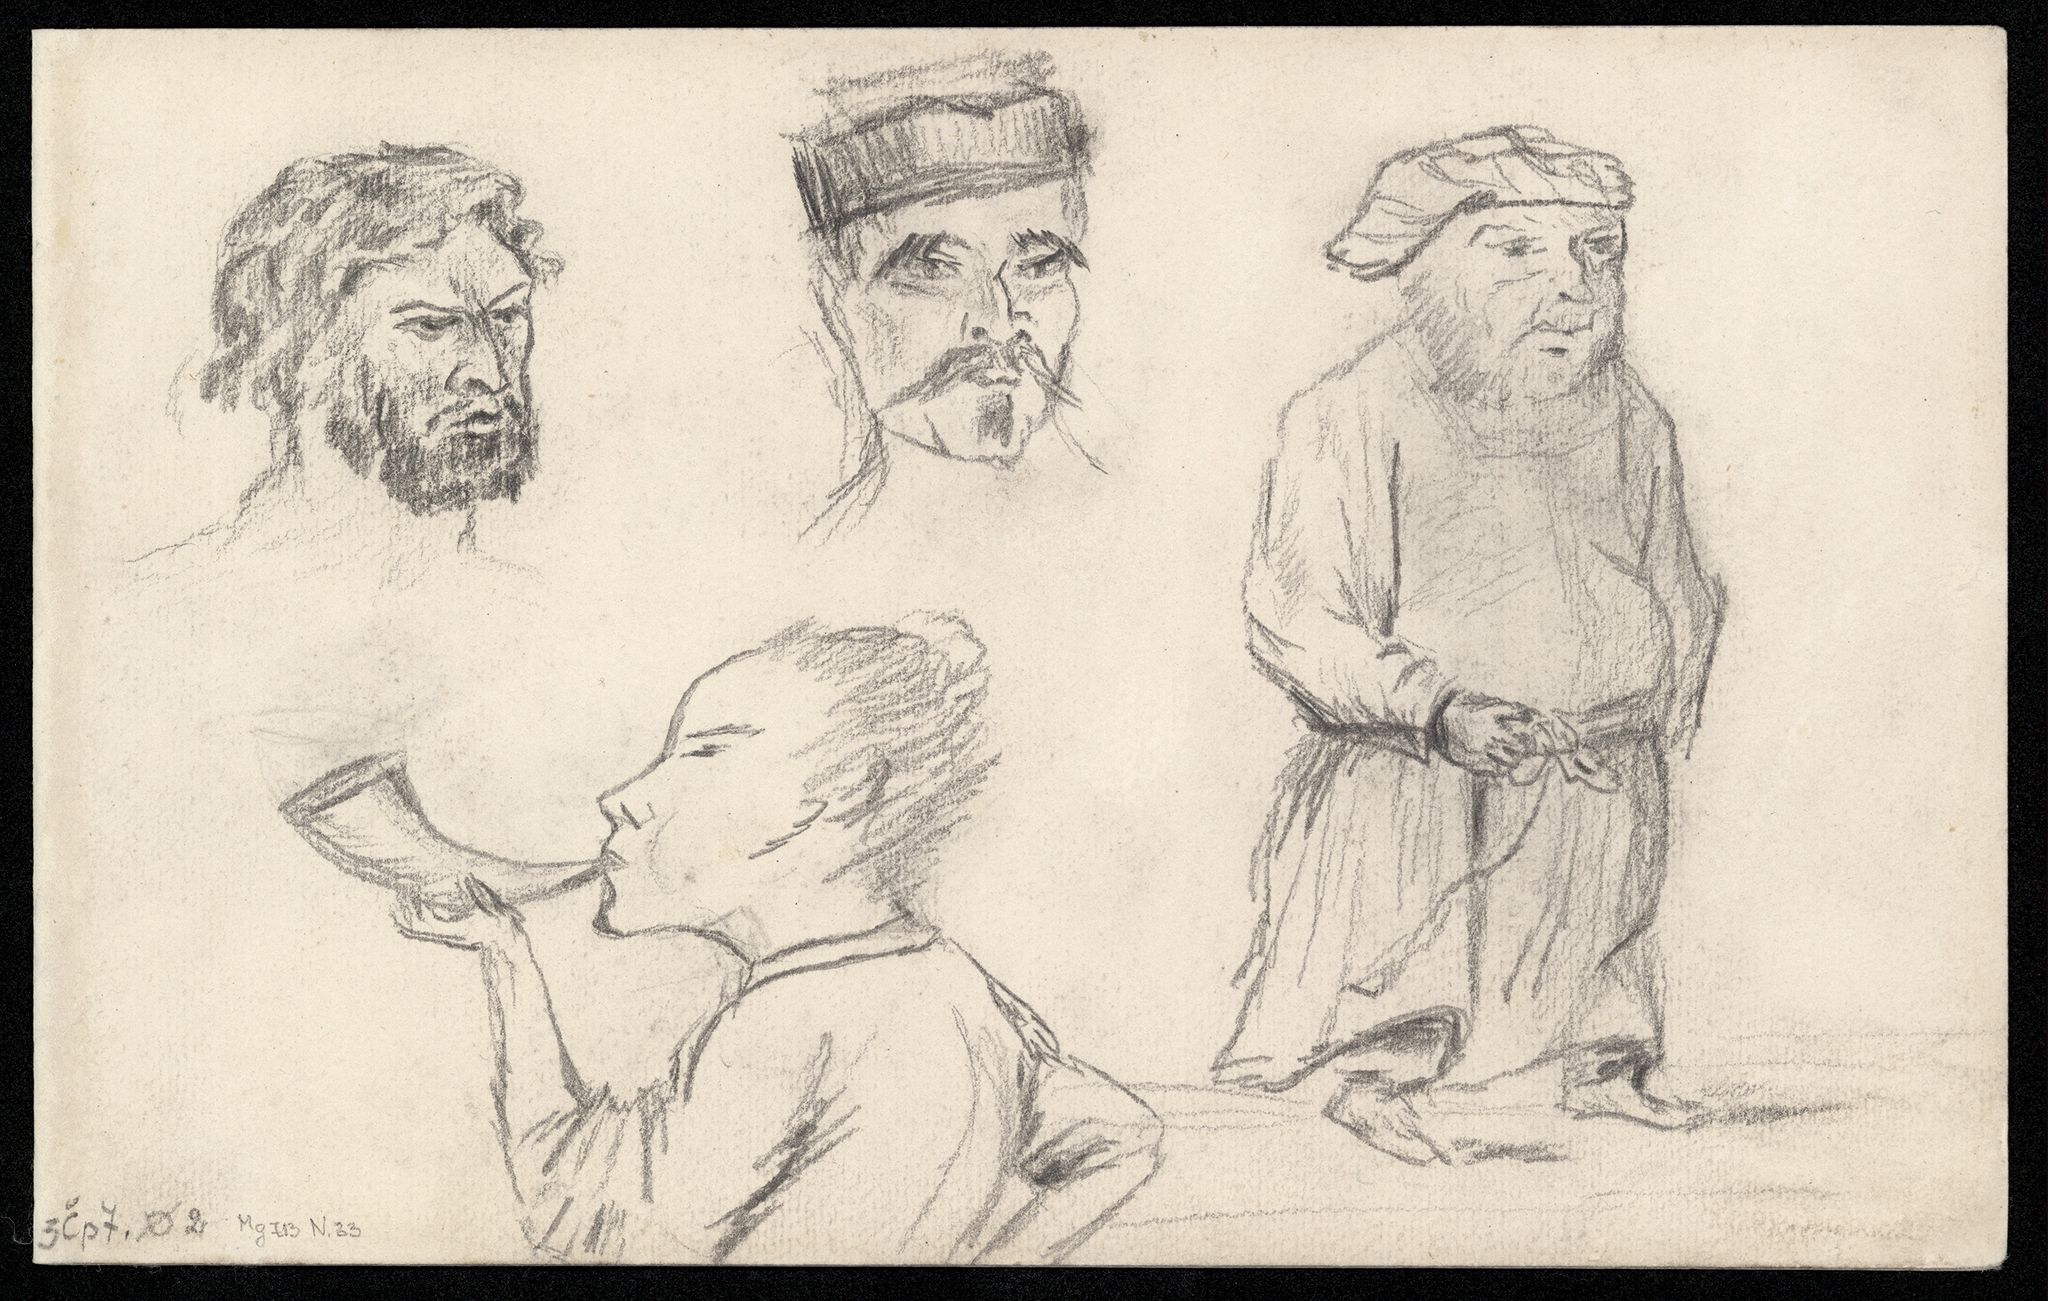 Image for: Drawings of Men